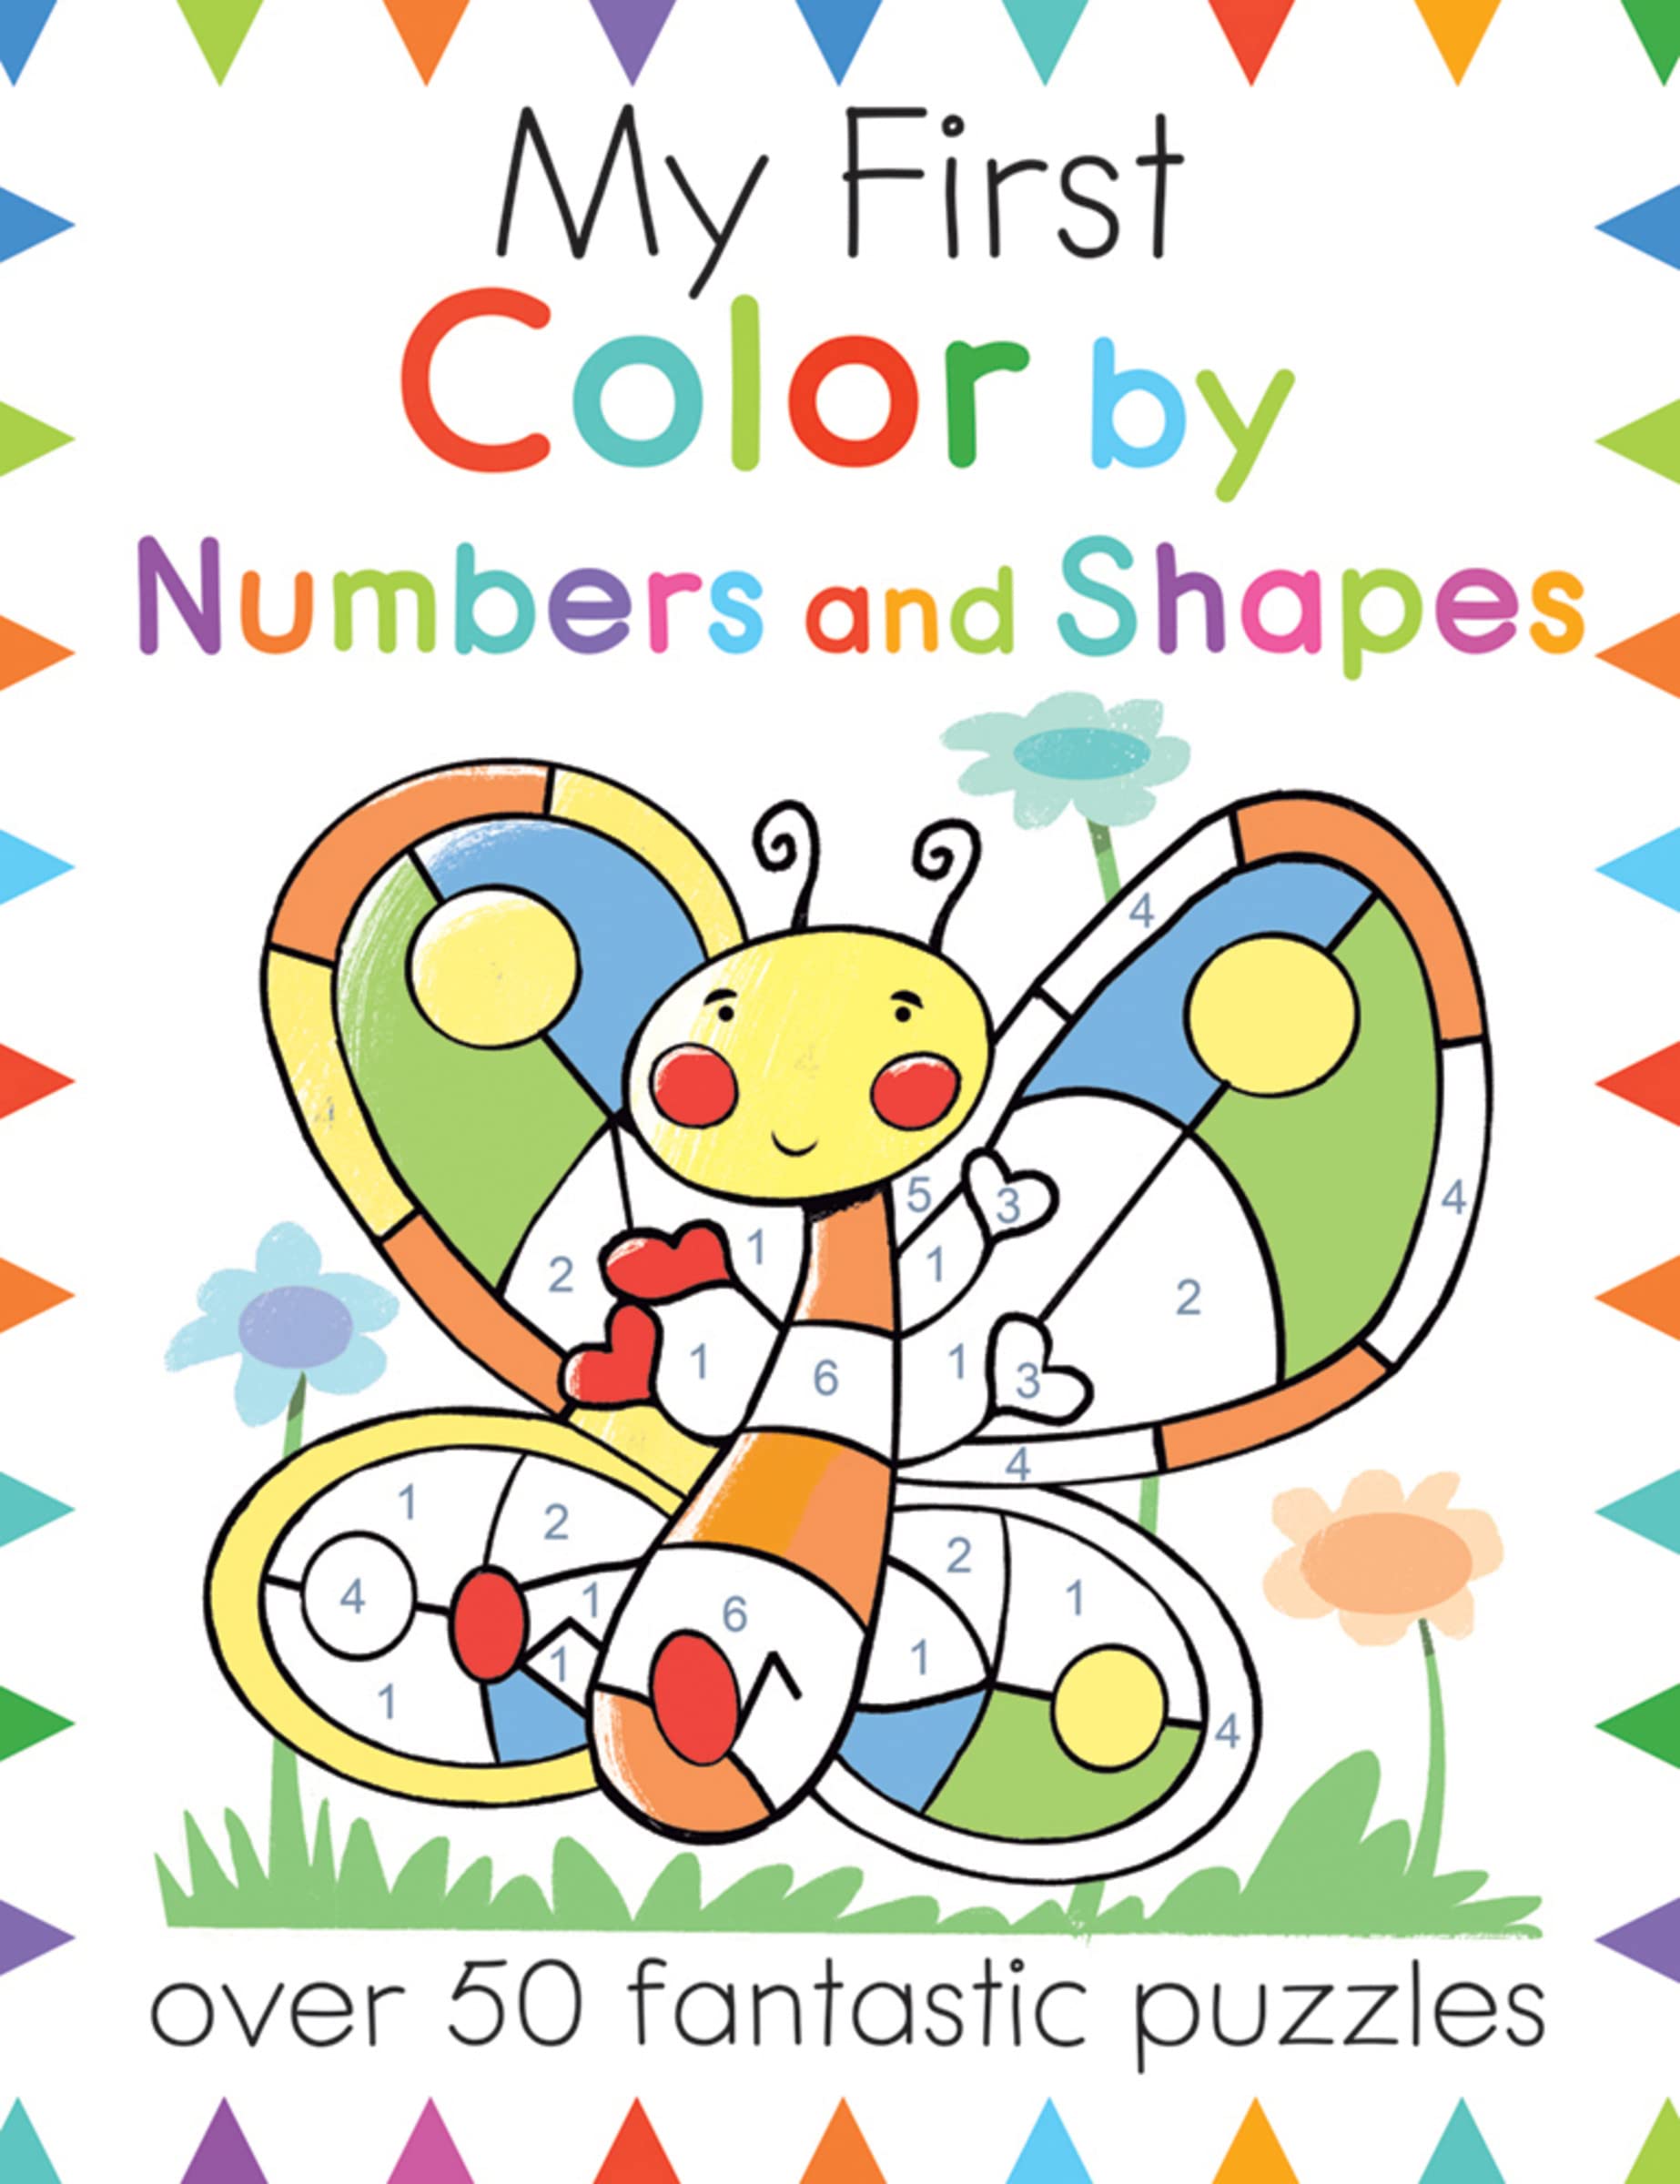 My First Color By Numbers and Shapes